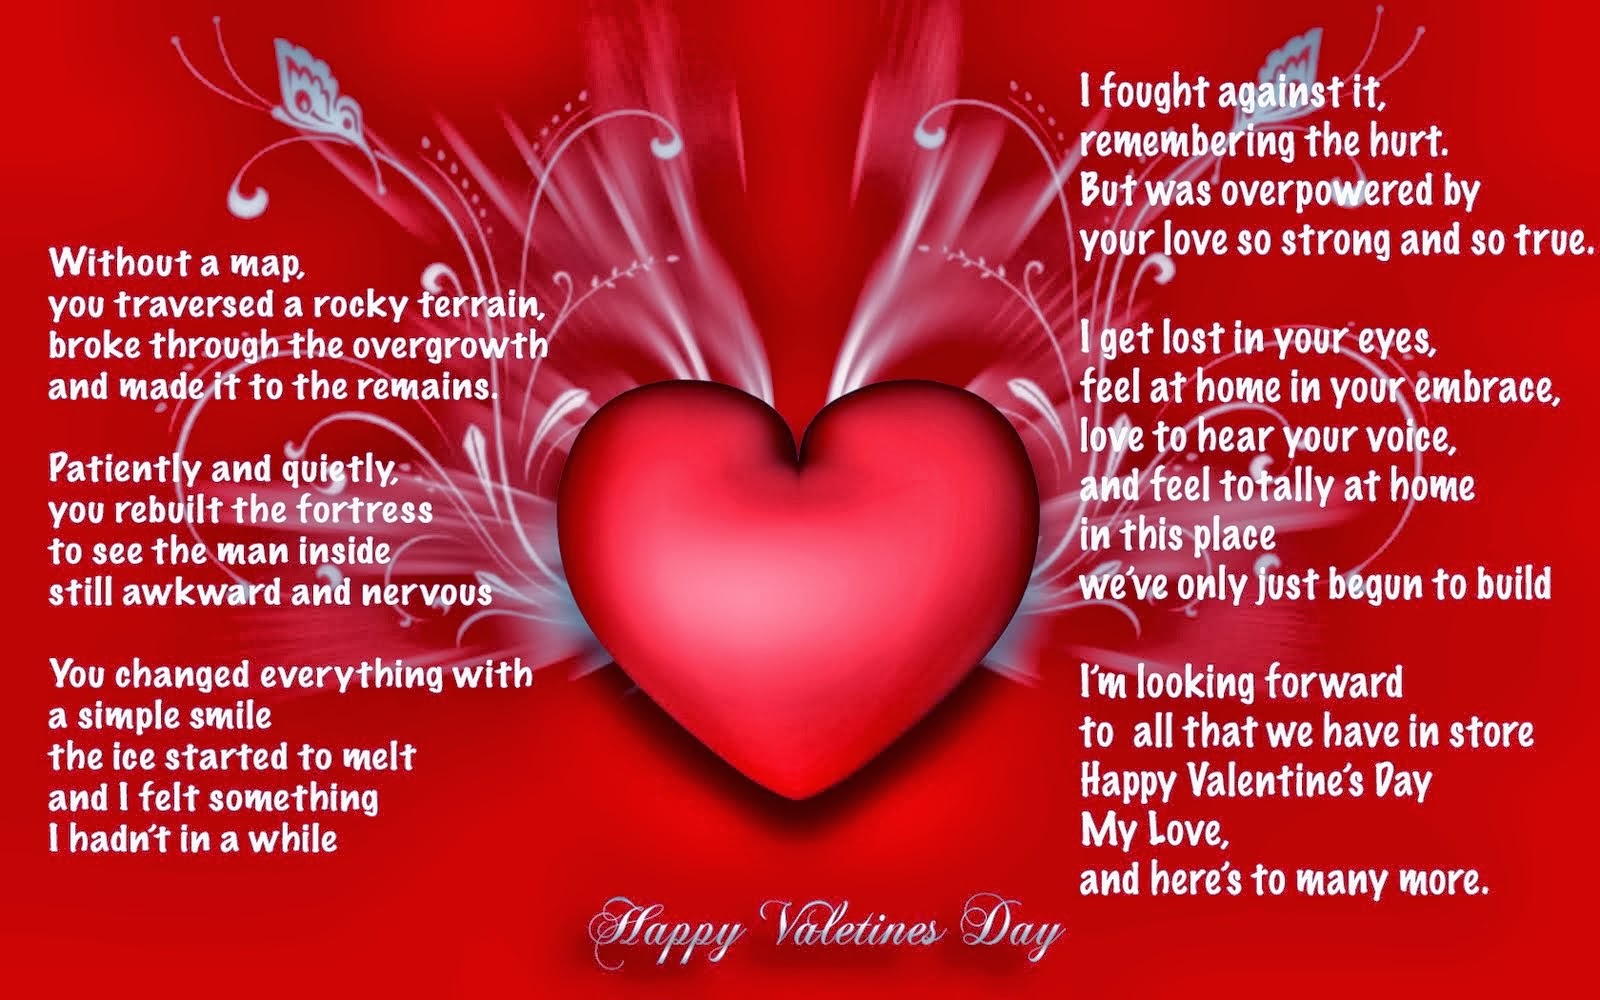 valentine messages quotes valentines happy wishes romantic girlfriend text funny faces smiling greetings wallpapers13 greeting smile